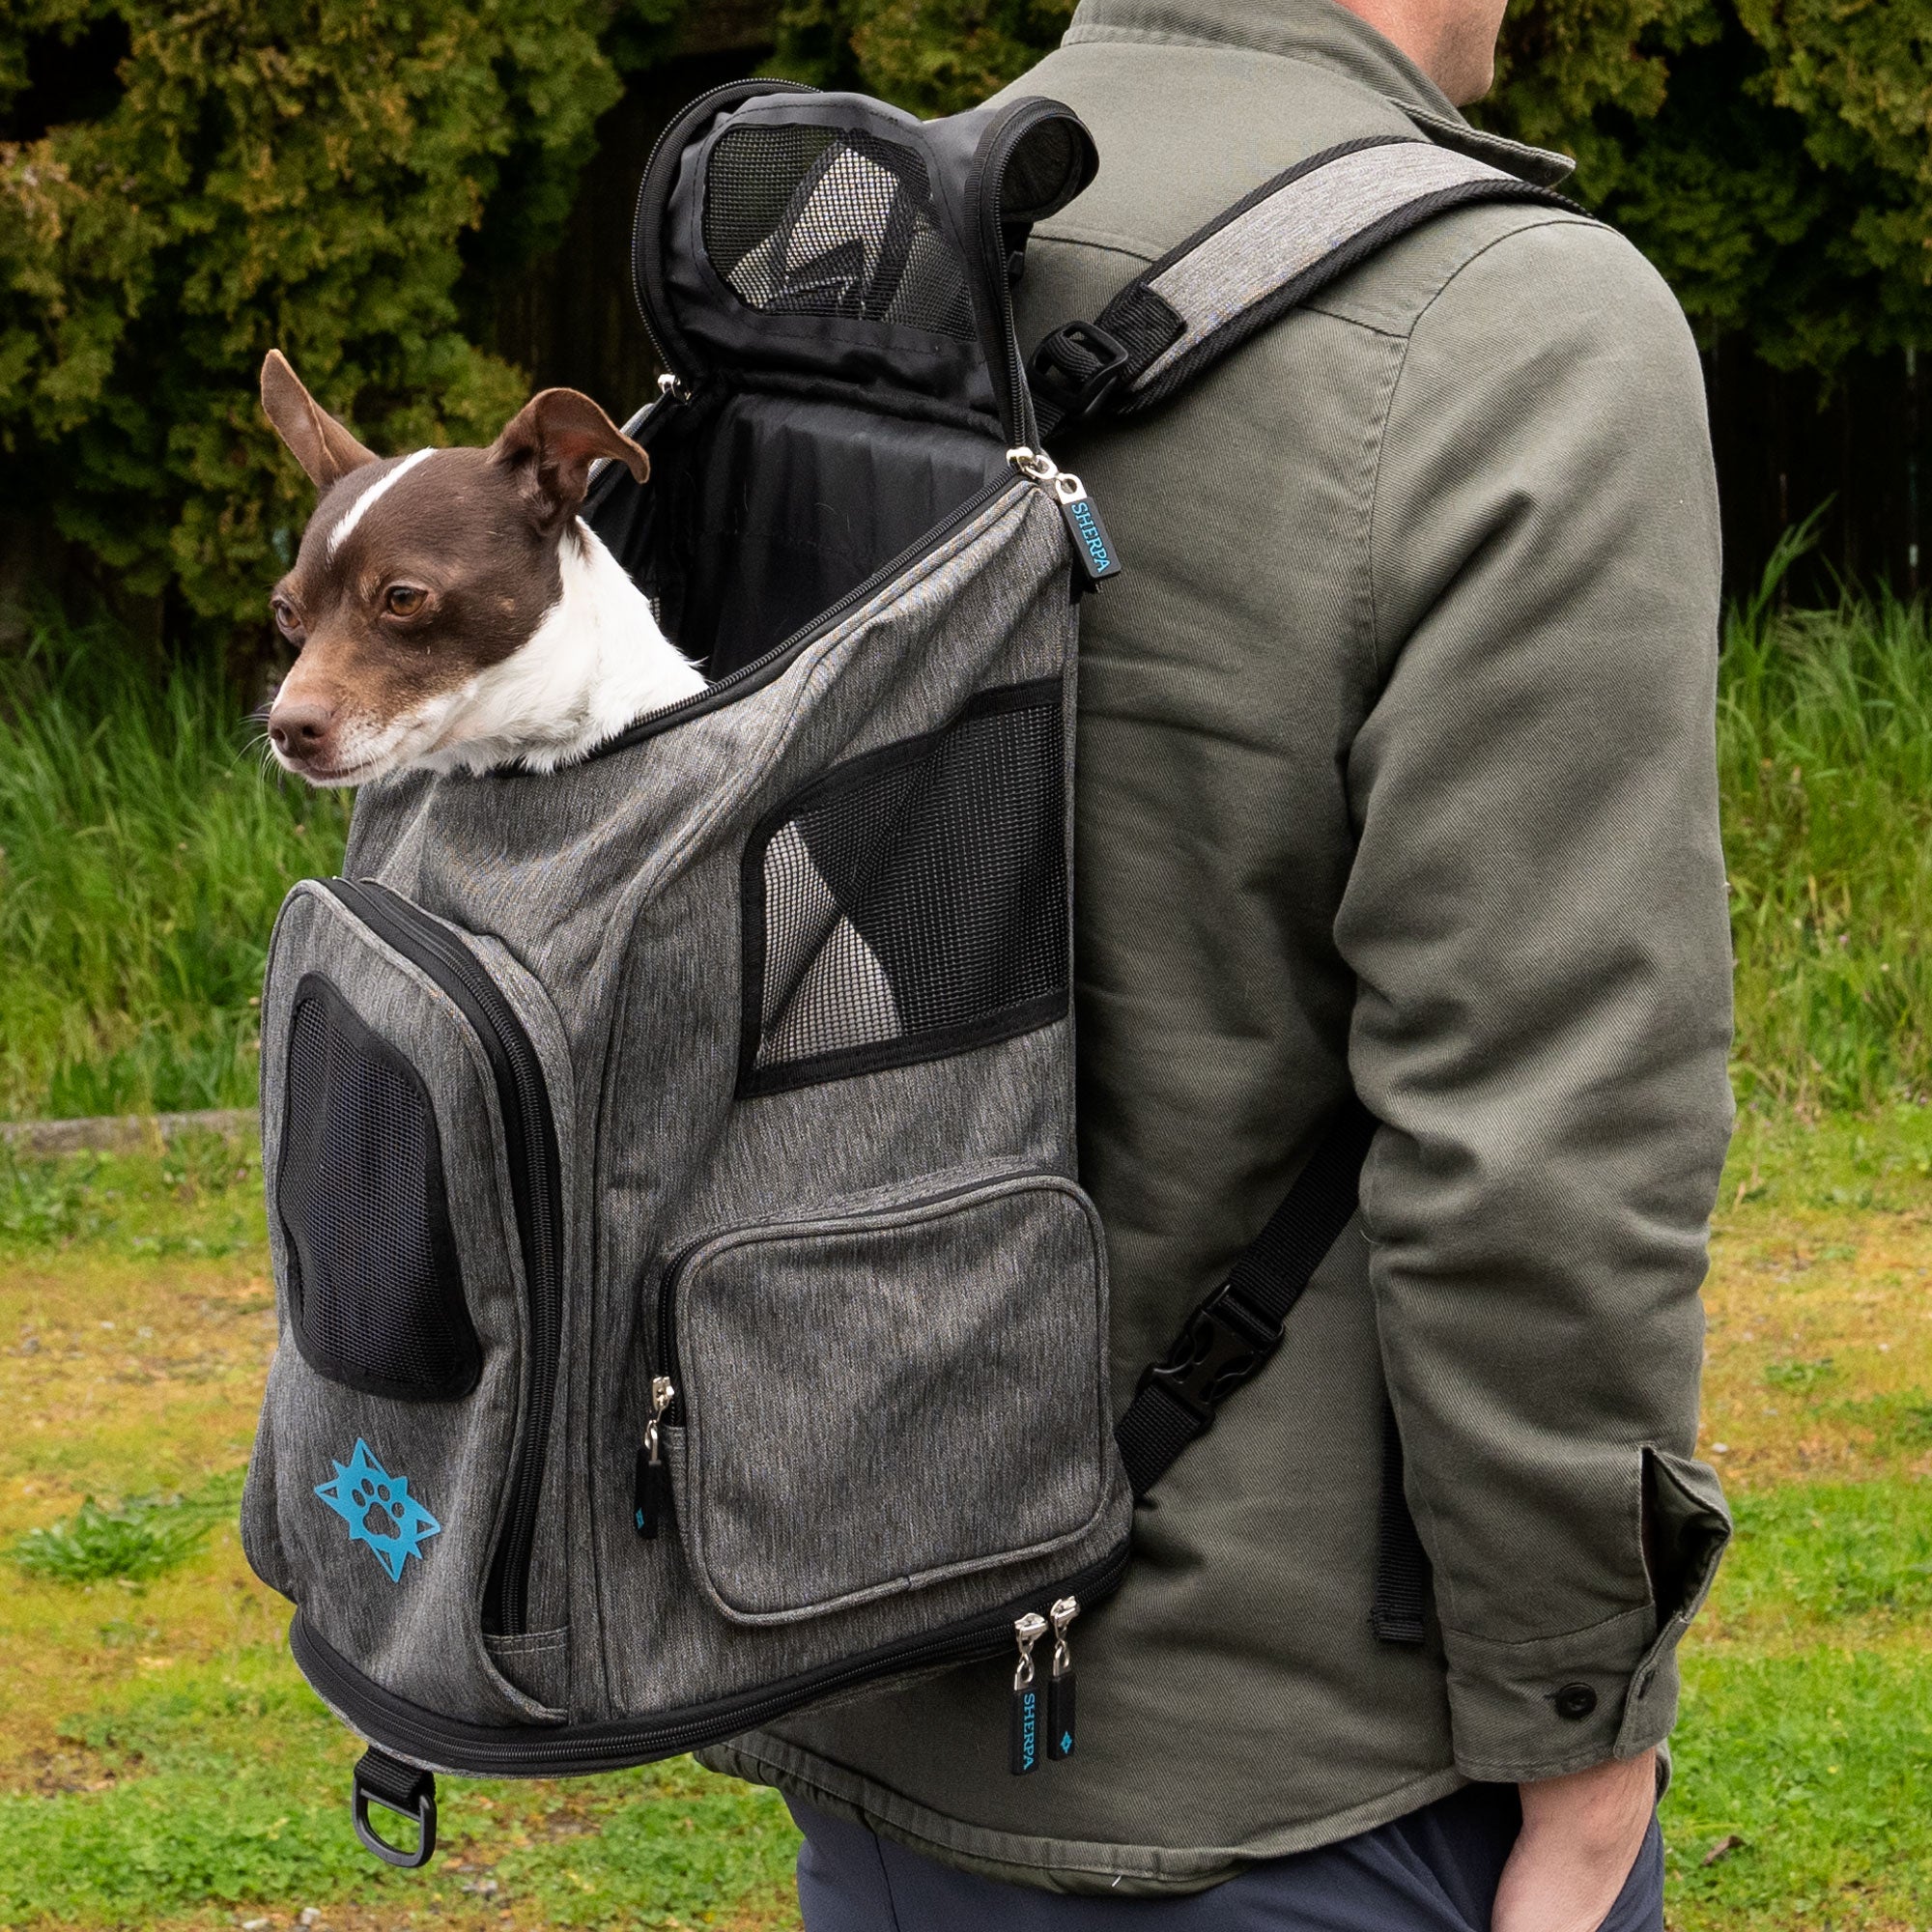 https://cdn.shopify.com/s/files/1/0533/5259/5632/products/55528_Sherpa_2_In_1_Backpack_Pet_Carrier_MD_Grey_Lifestyle2_Square_2000x2000.jpg?v=1679333361